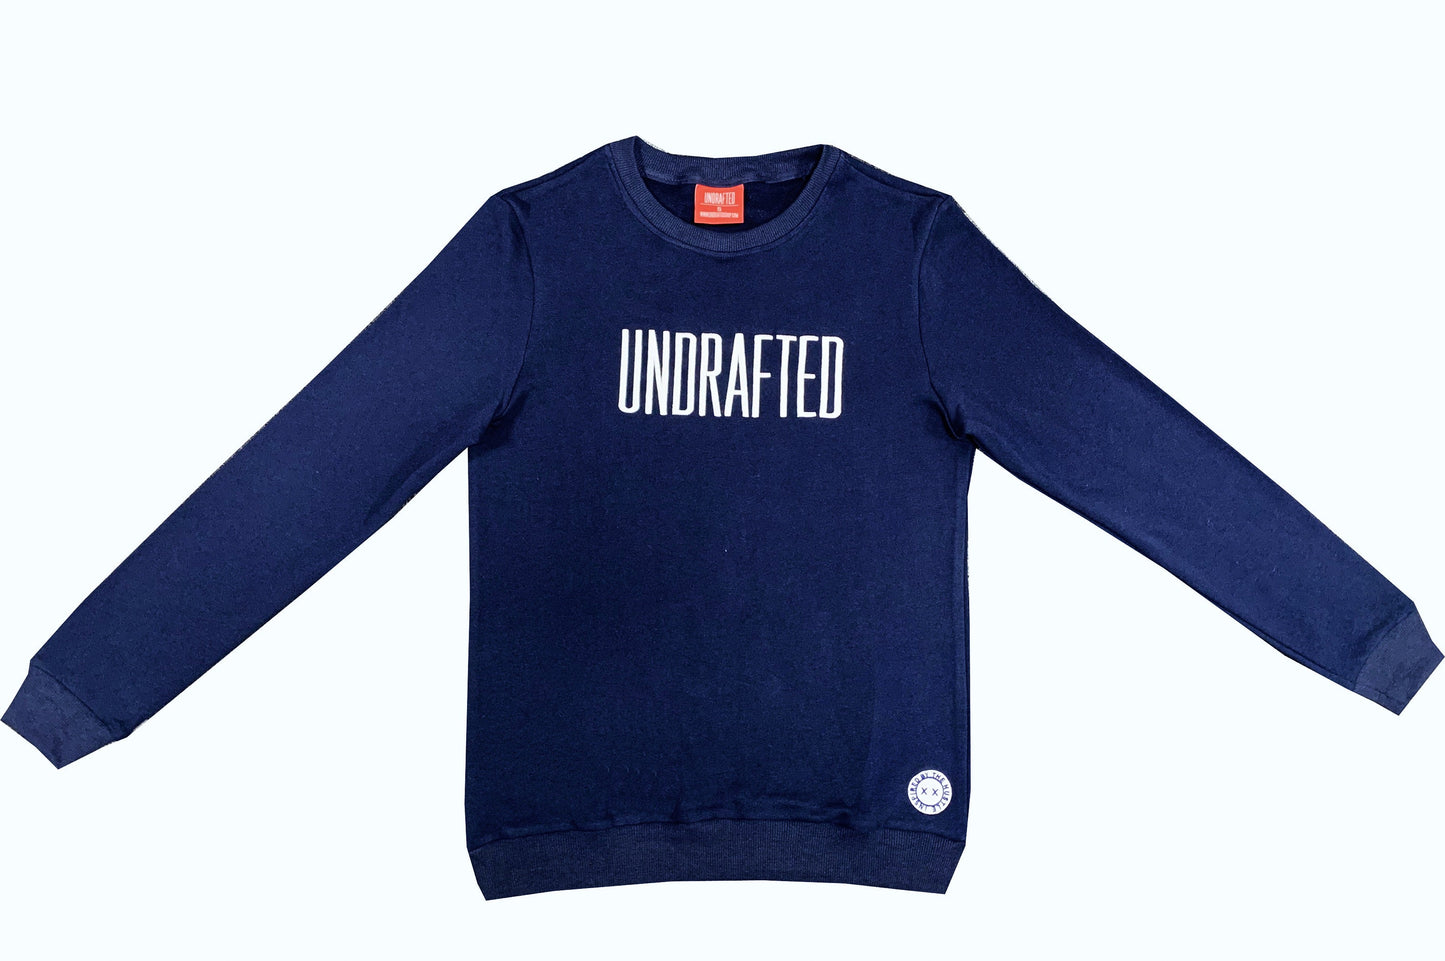 Embroidered Undrafted Sweatshirt Navy Blue/White*